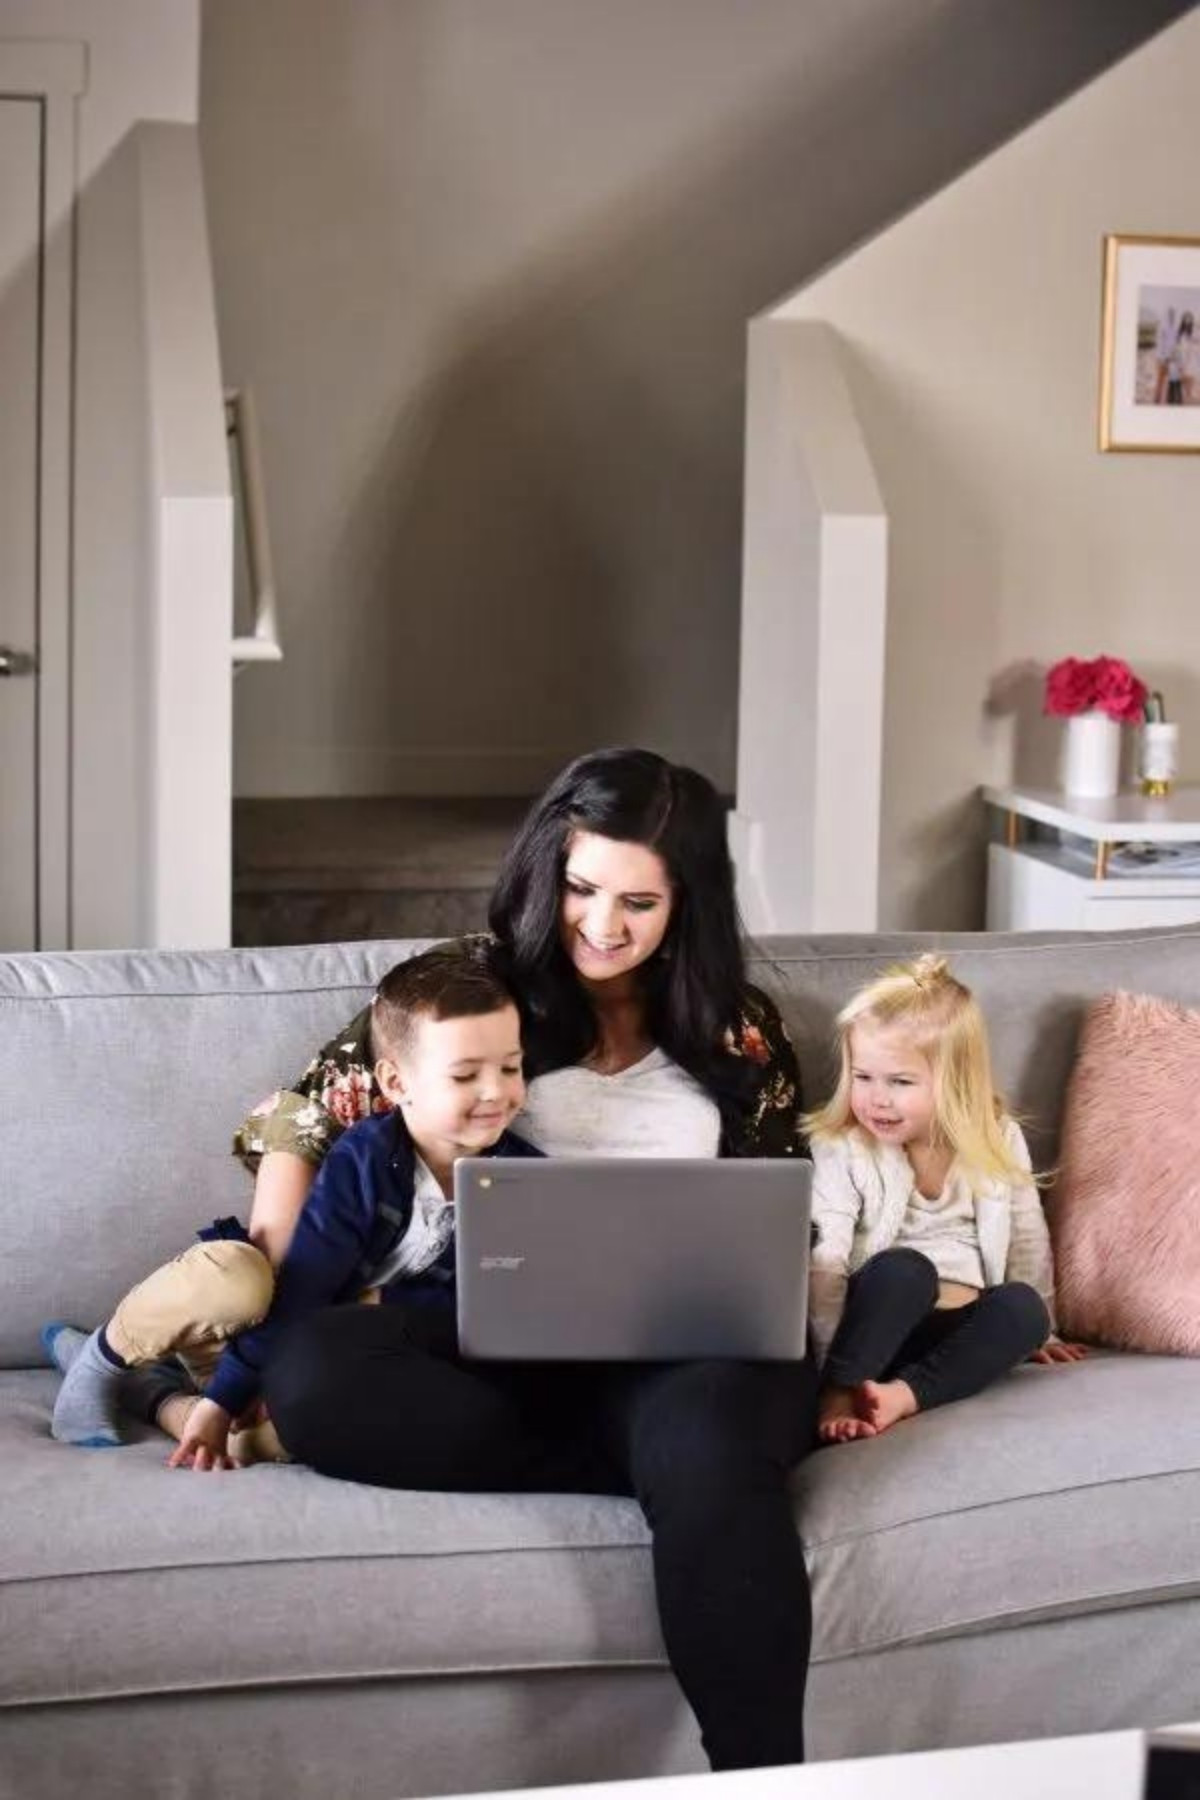 Woman sits on couch with boy and girl on either side of her and a computer on her lap.